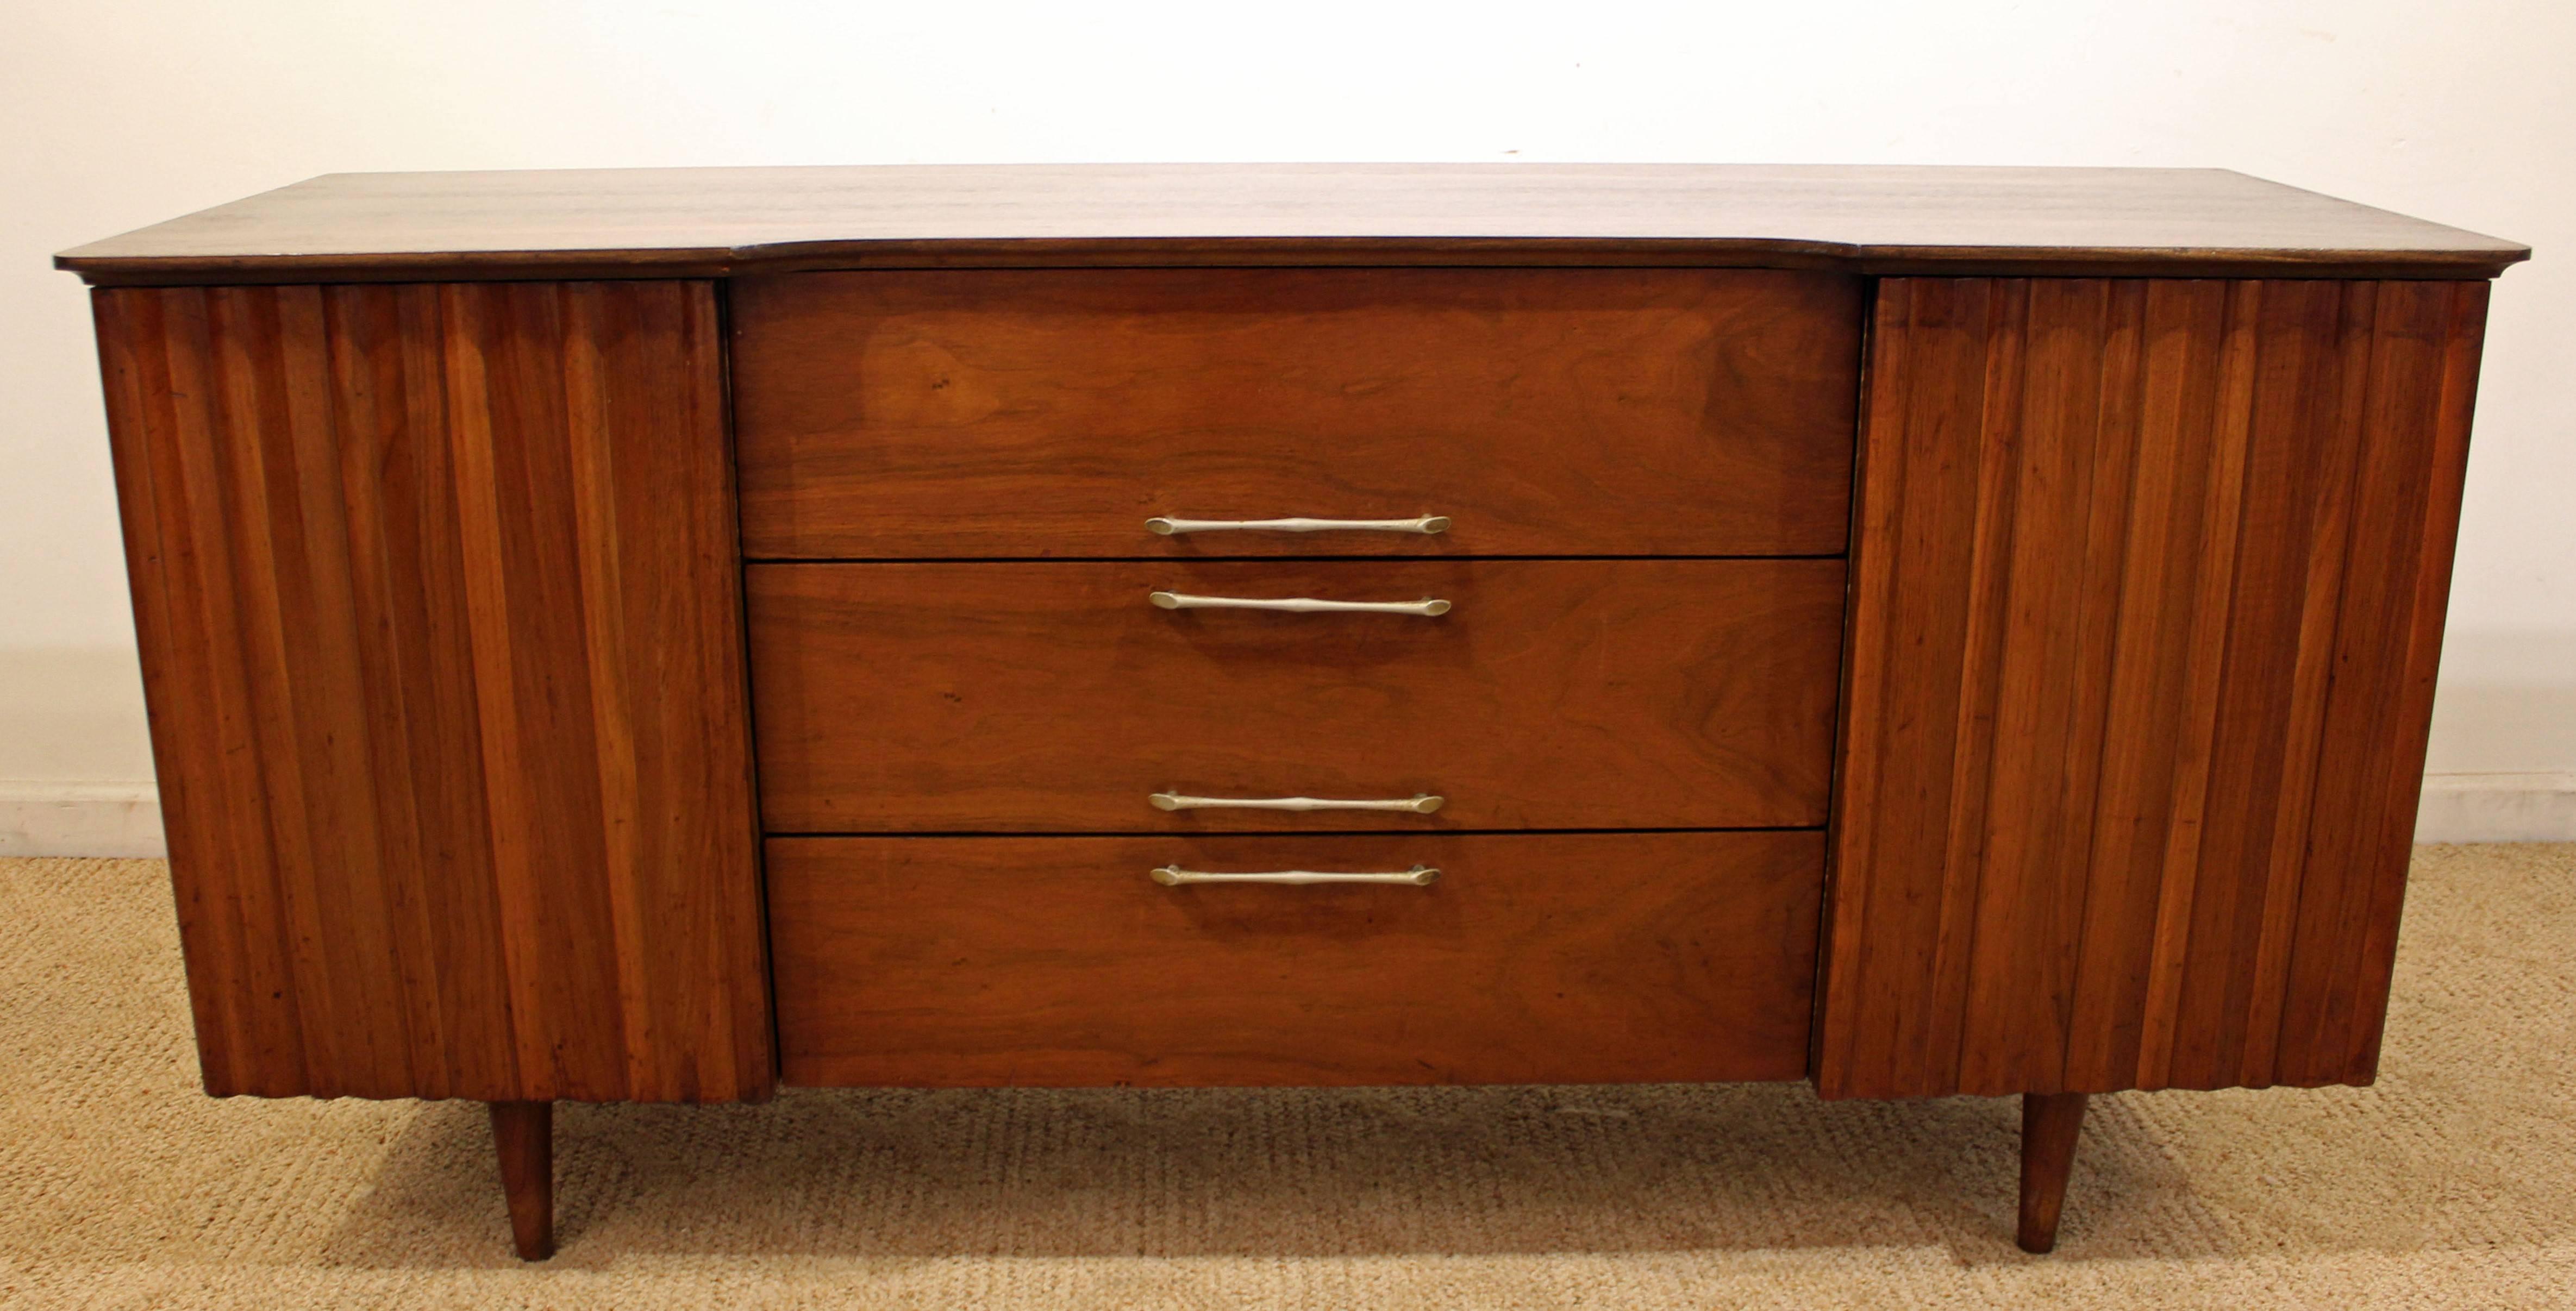 Offered is a mid-century credenza made of walnut, featuring two sculpted doors with shelving inside and three drawers. 